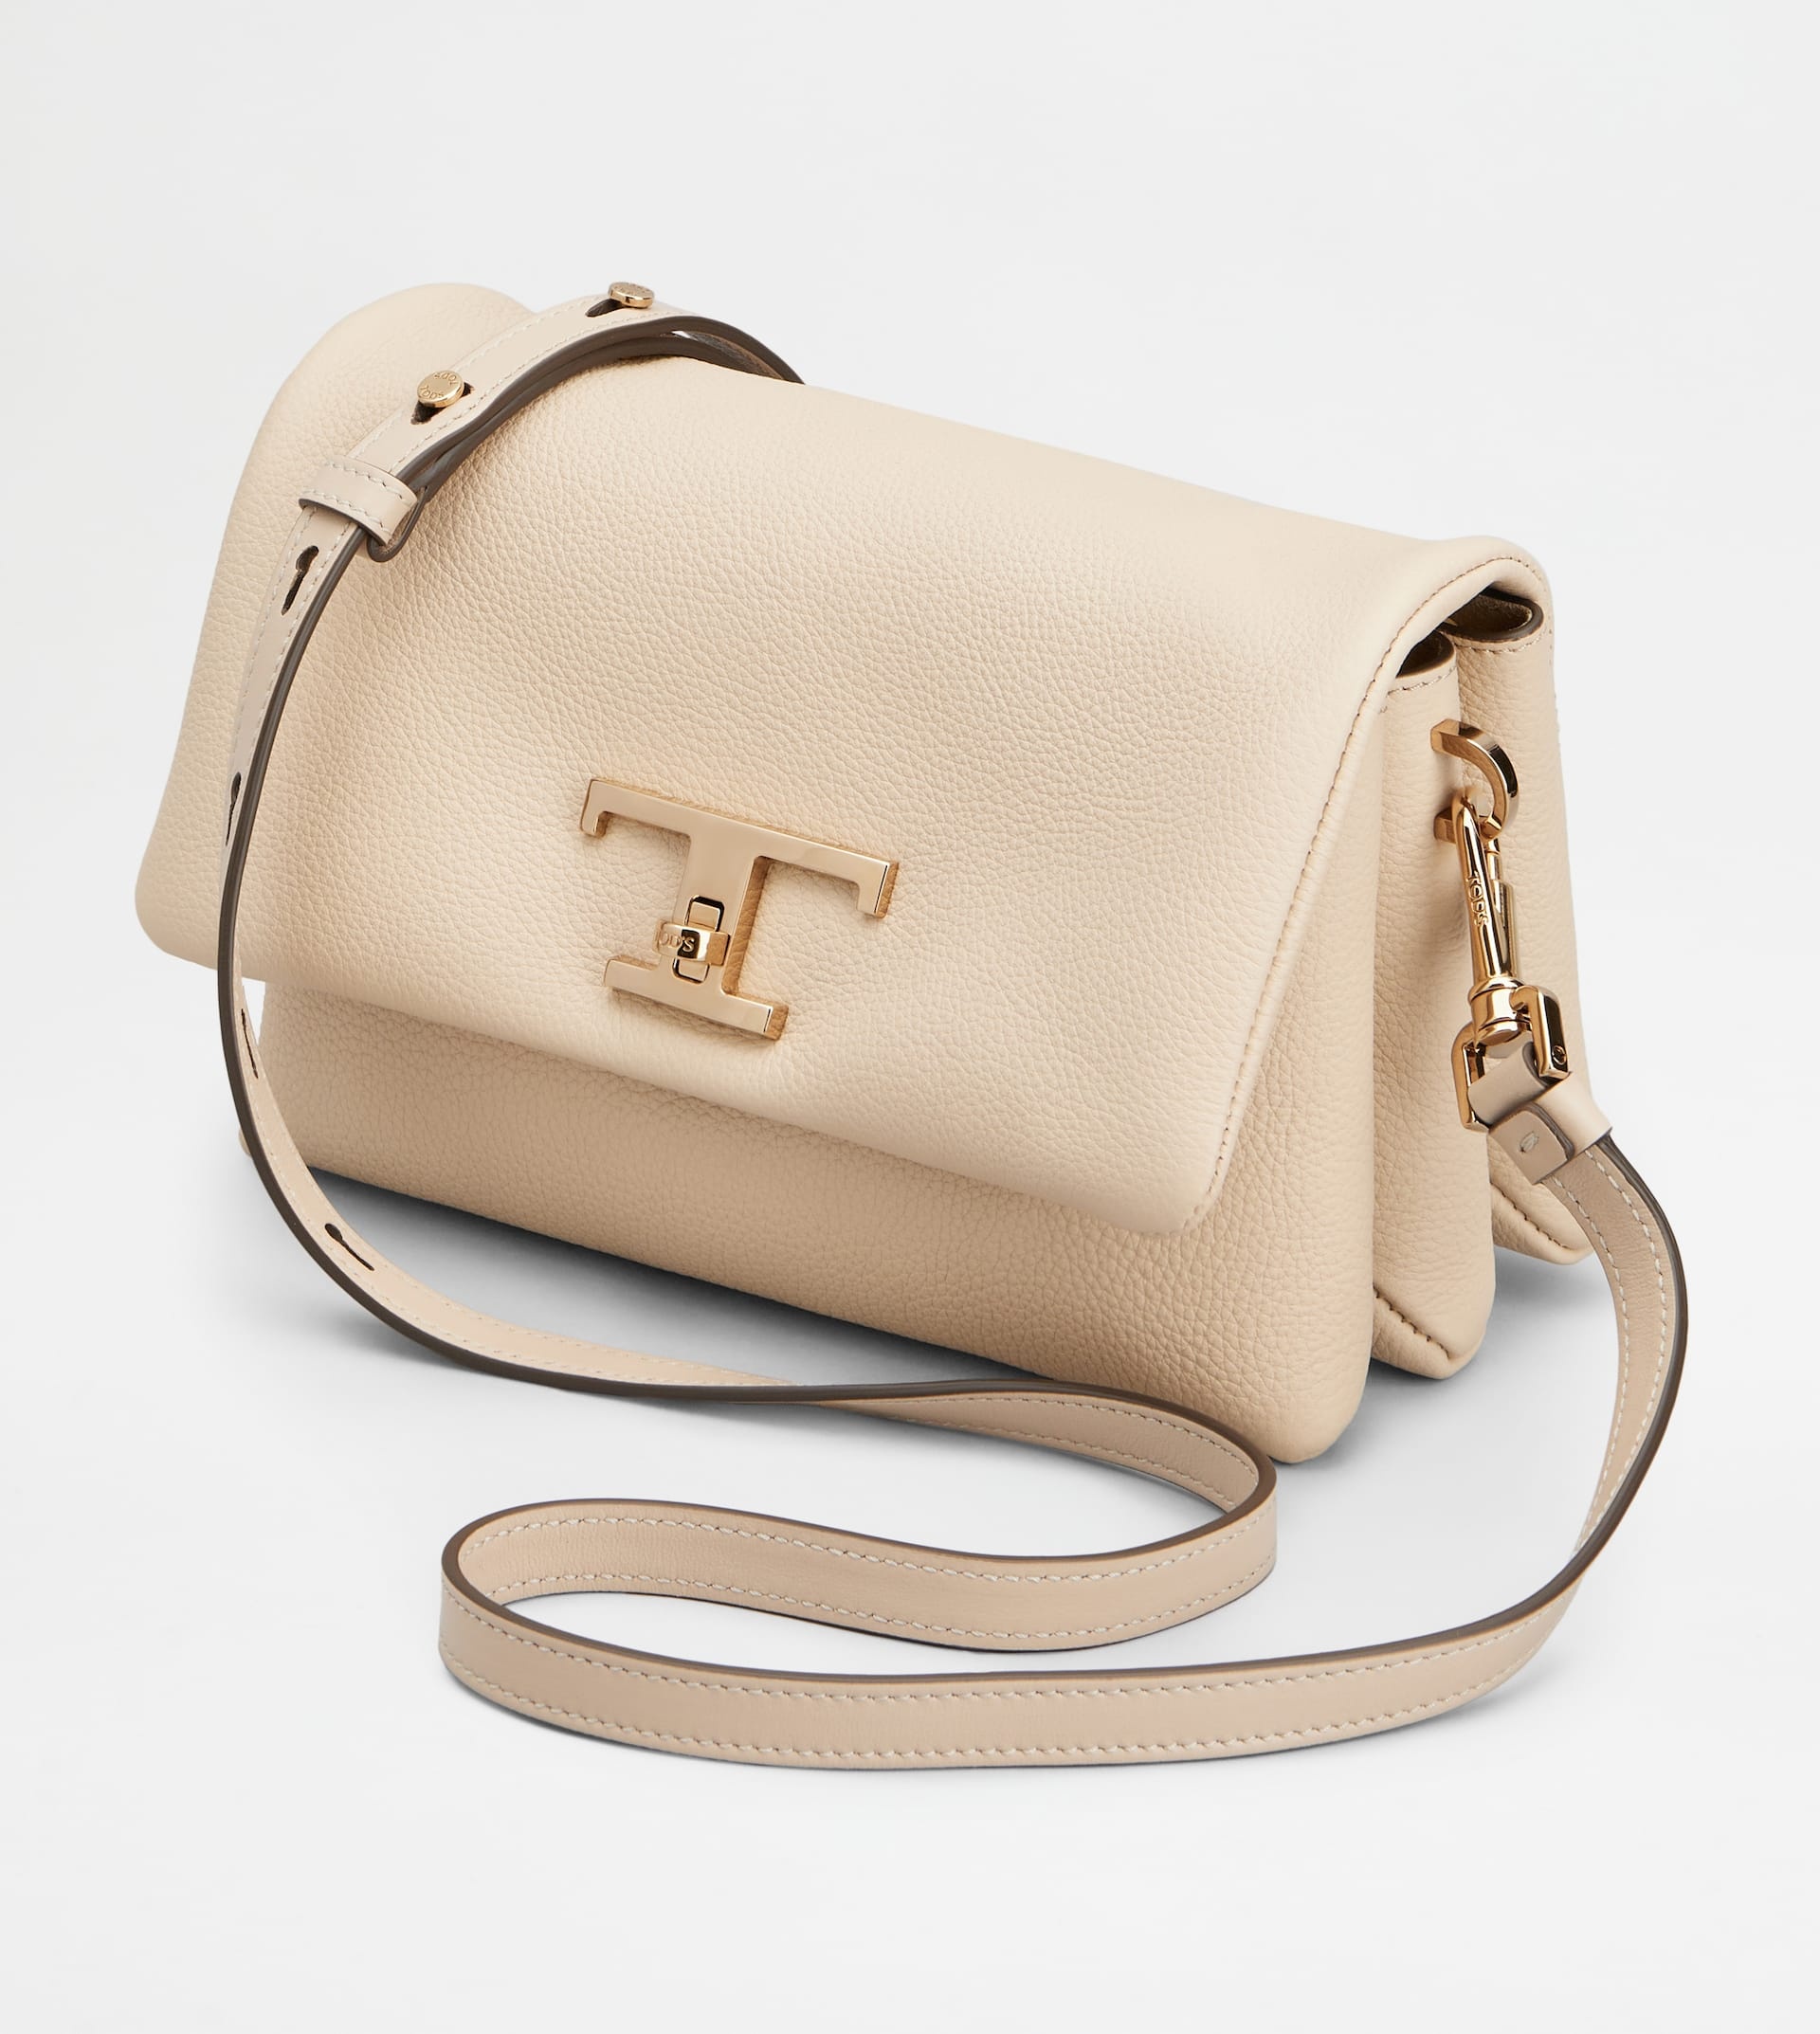 T TIMELESS FLAP BAG IN LEATHER MINI - BEIGE - 6